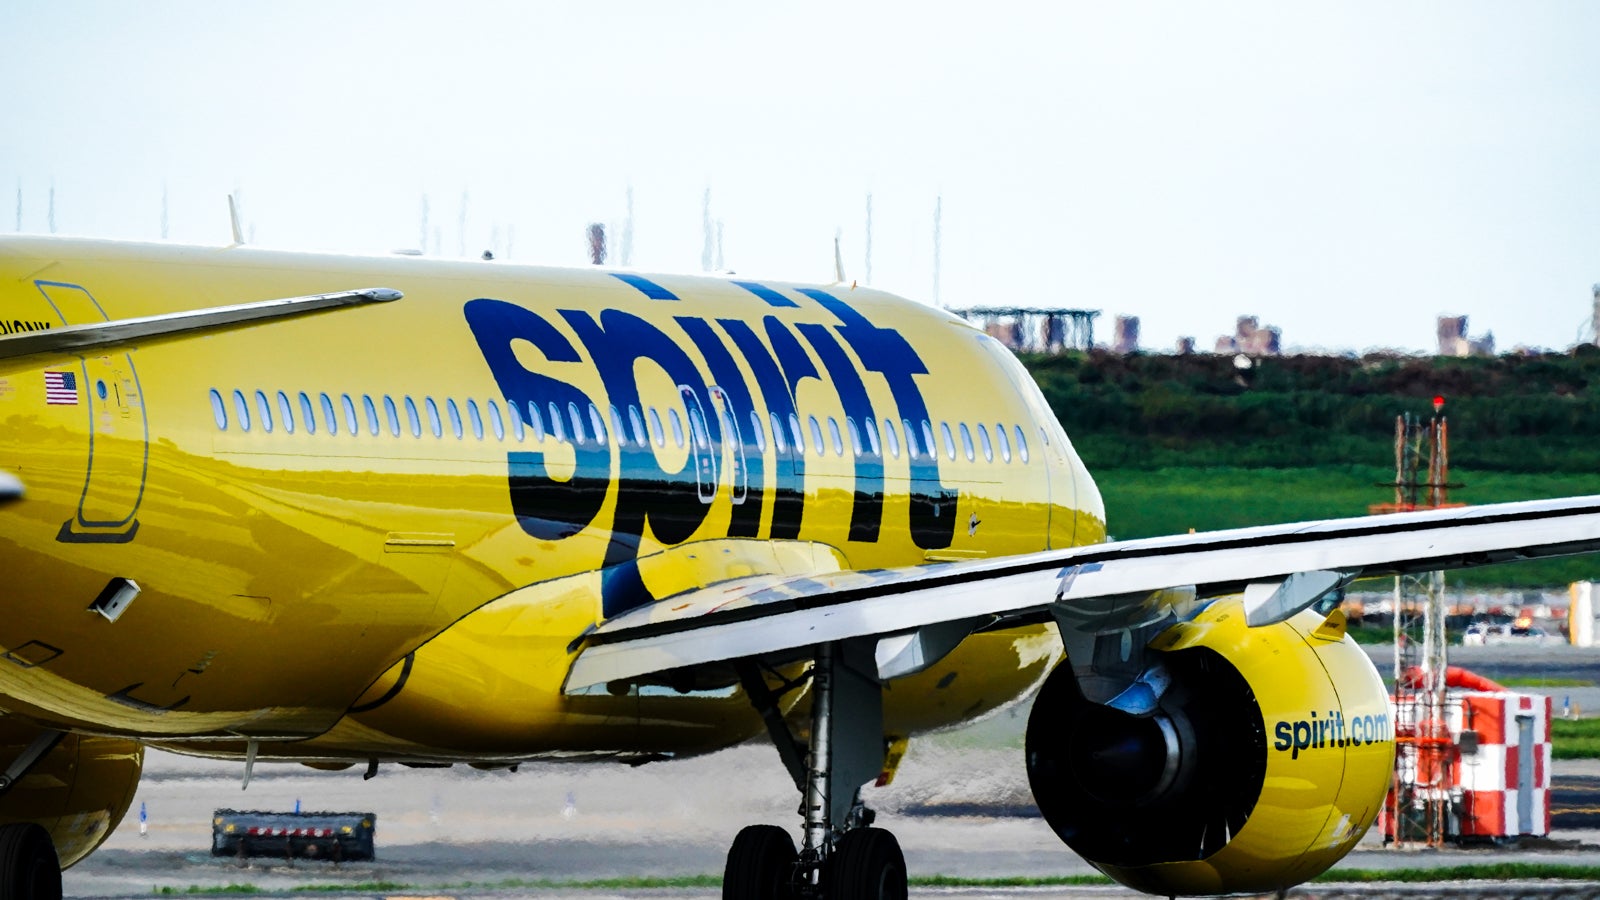 A Spirit Airlines aircraft takes off at La Guardia Airport